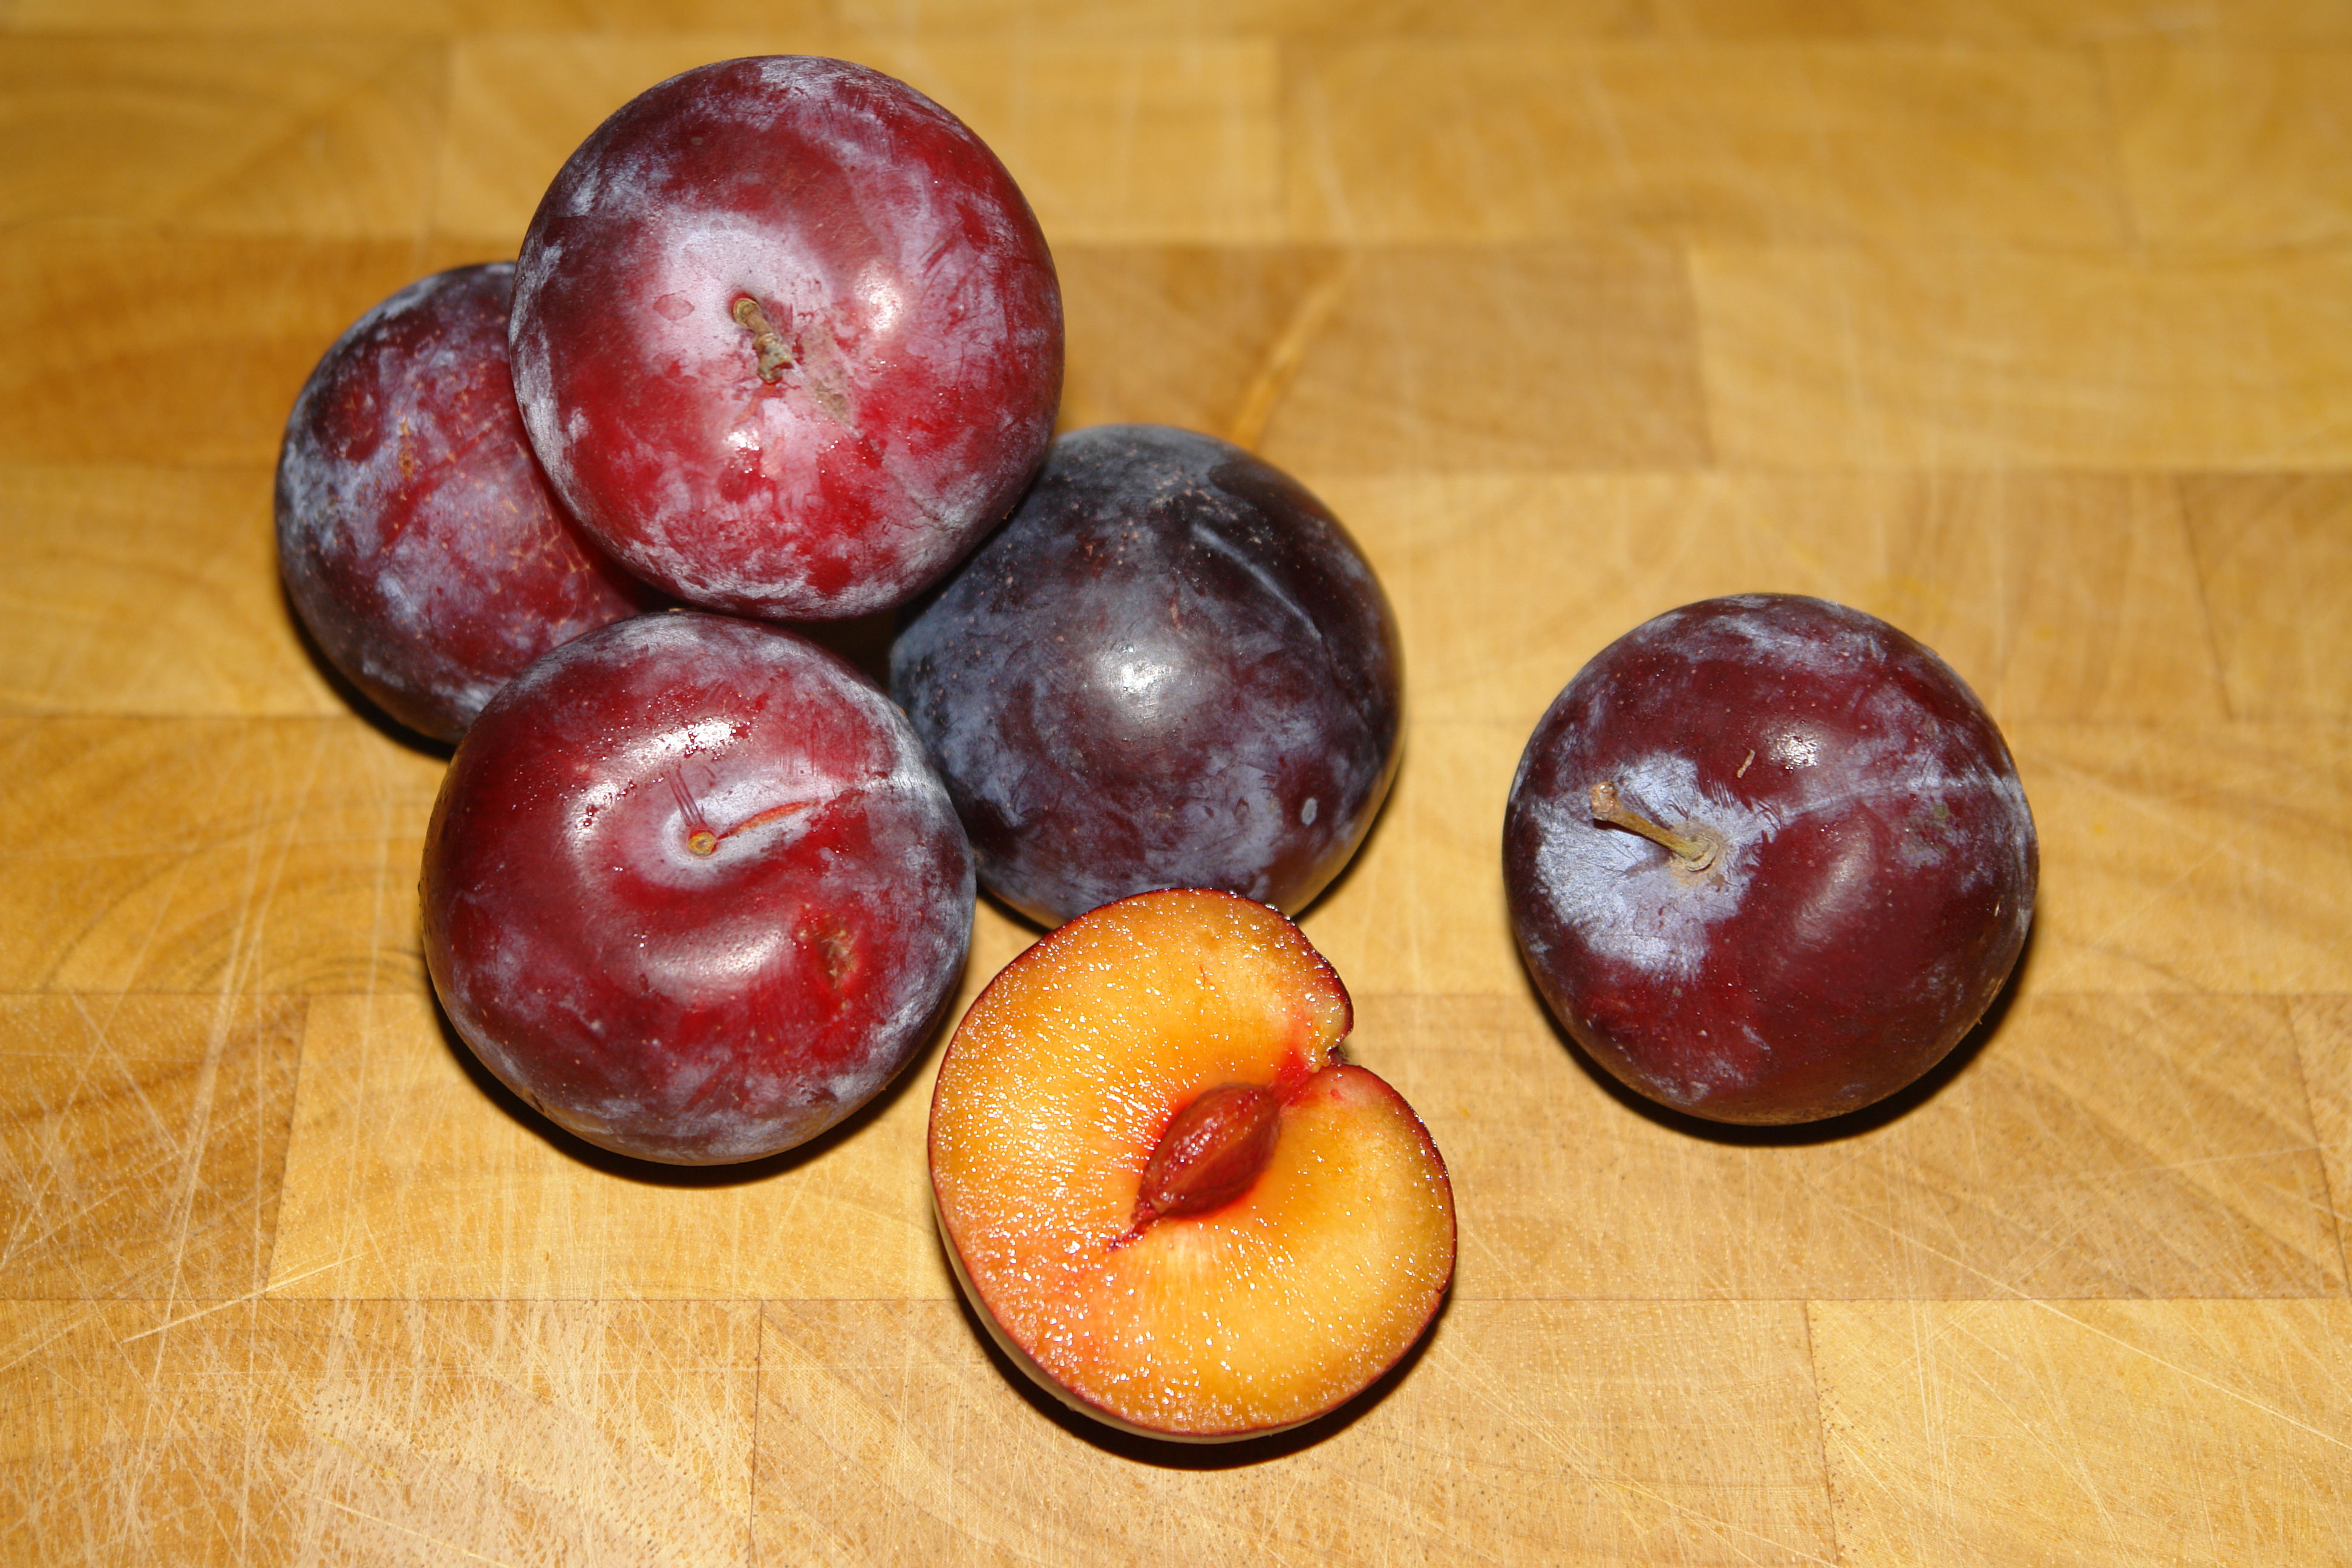 plums facts and health benefits